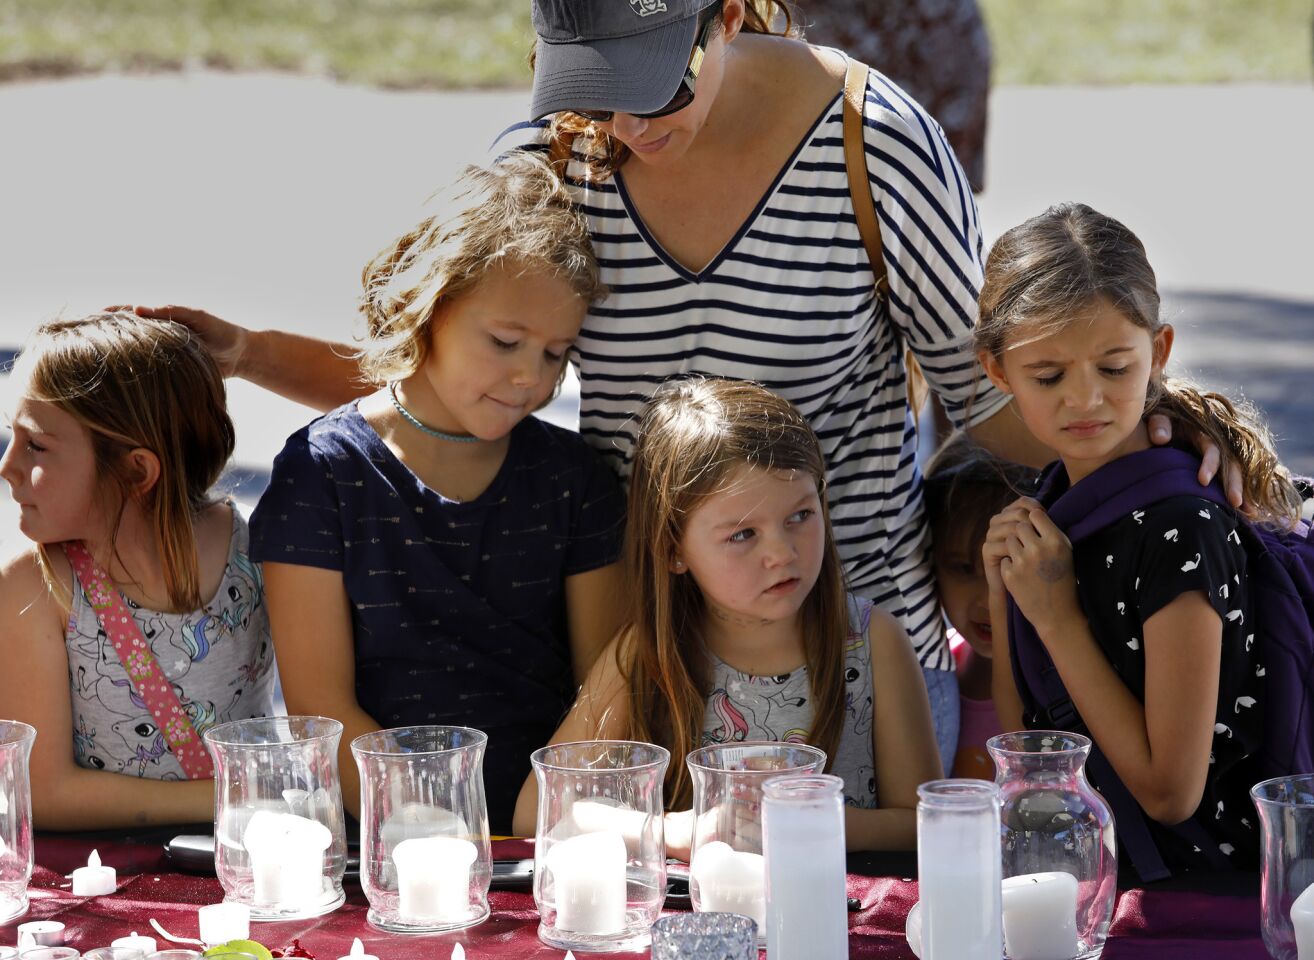 Sarah Cardenas, age 38, brings some of her students from Classical Conversation (home school) in Boca Raton to the memorial for the victims of the shooting at Marjorie Stonemason Douglas High School in Parkland, Florida where a gunman killed 17 dead and injured 14 in a school shooting. "We came to pay our respects and pray," says Cardenas. (Carolyn Cole/Los Angeles Times)